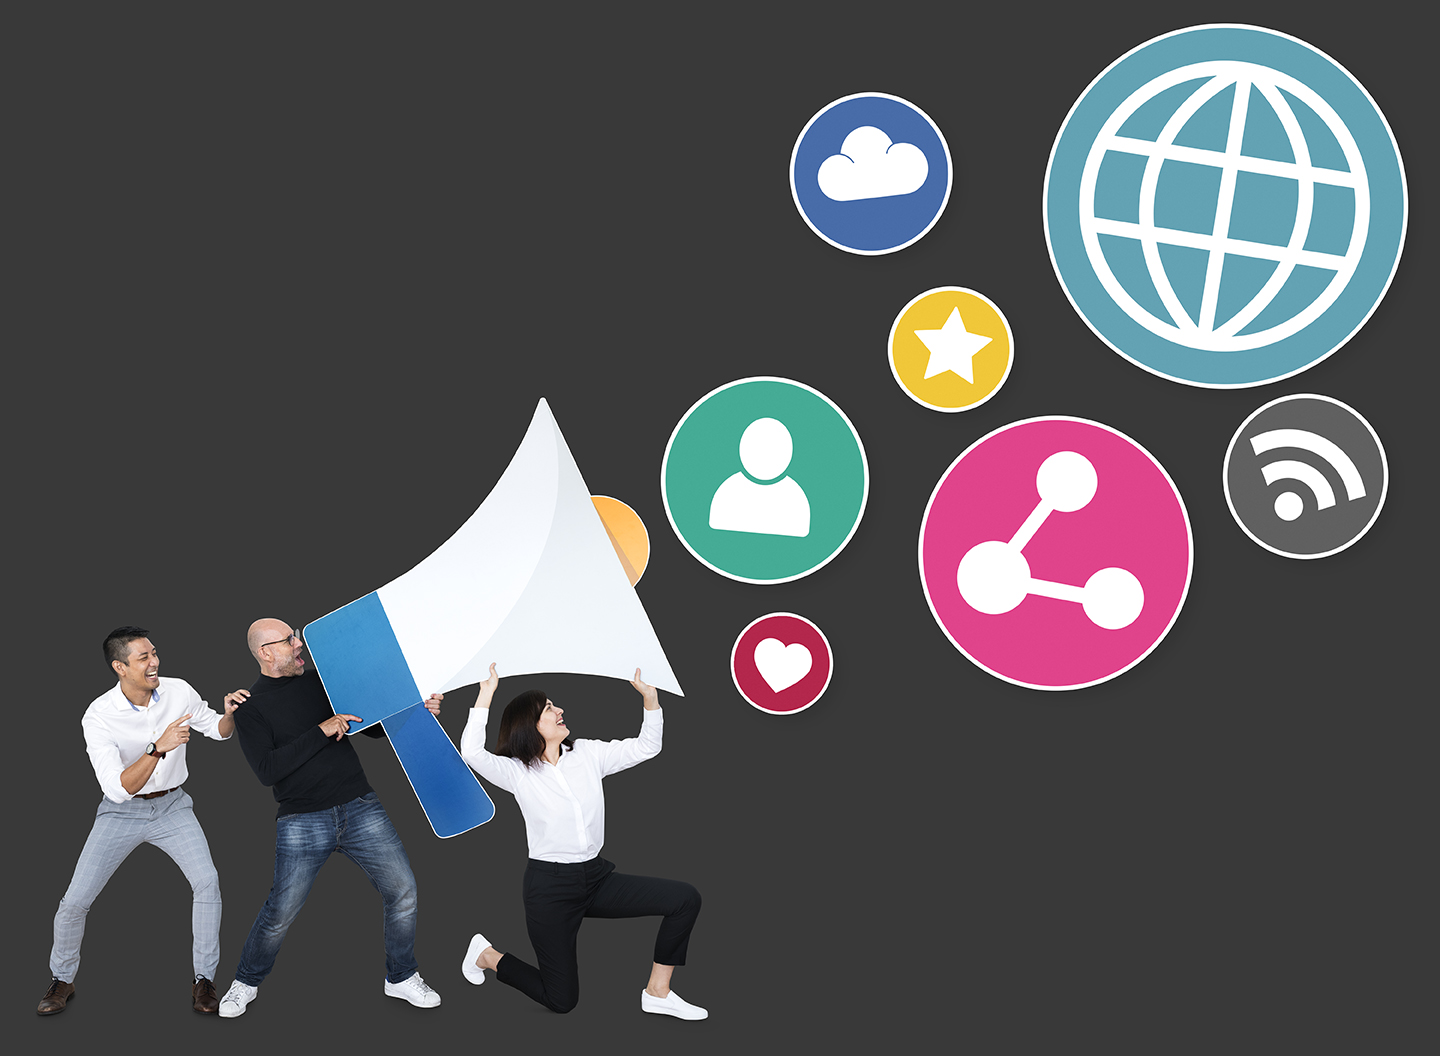 People with a megaphone and social media marketing icons